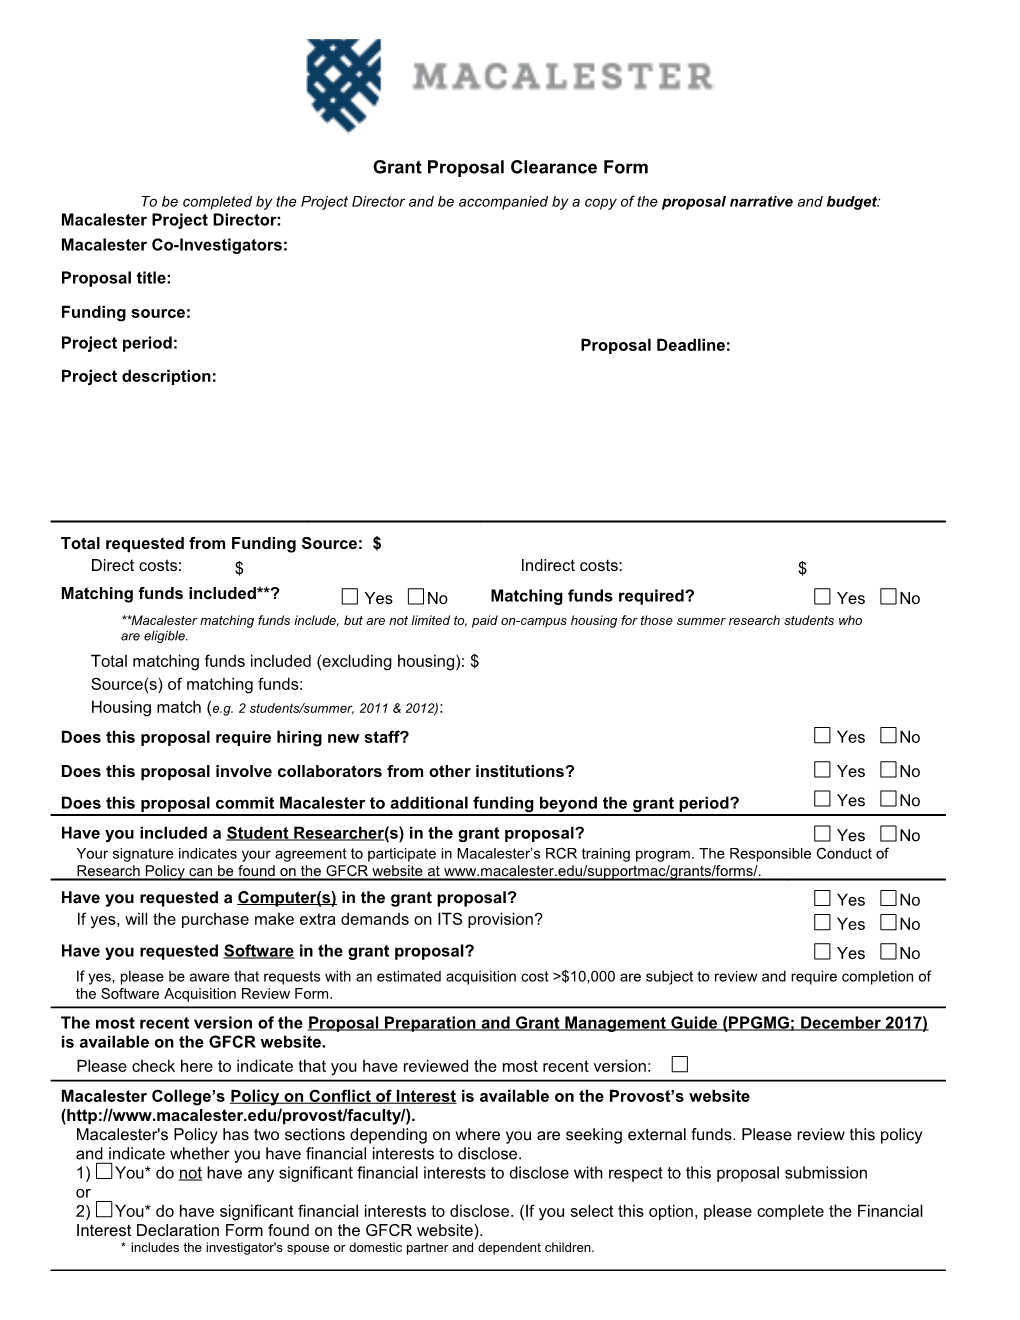 Grant Proposal Clearance Form